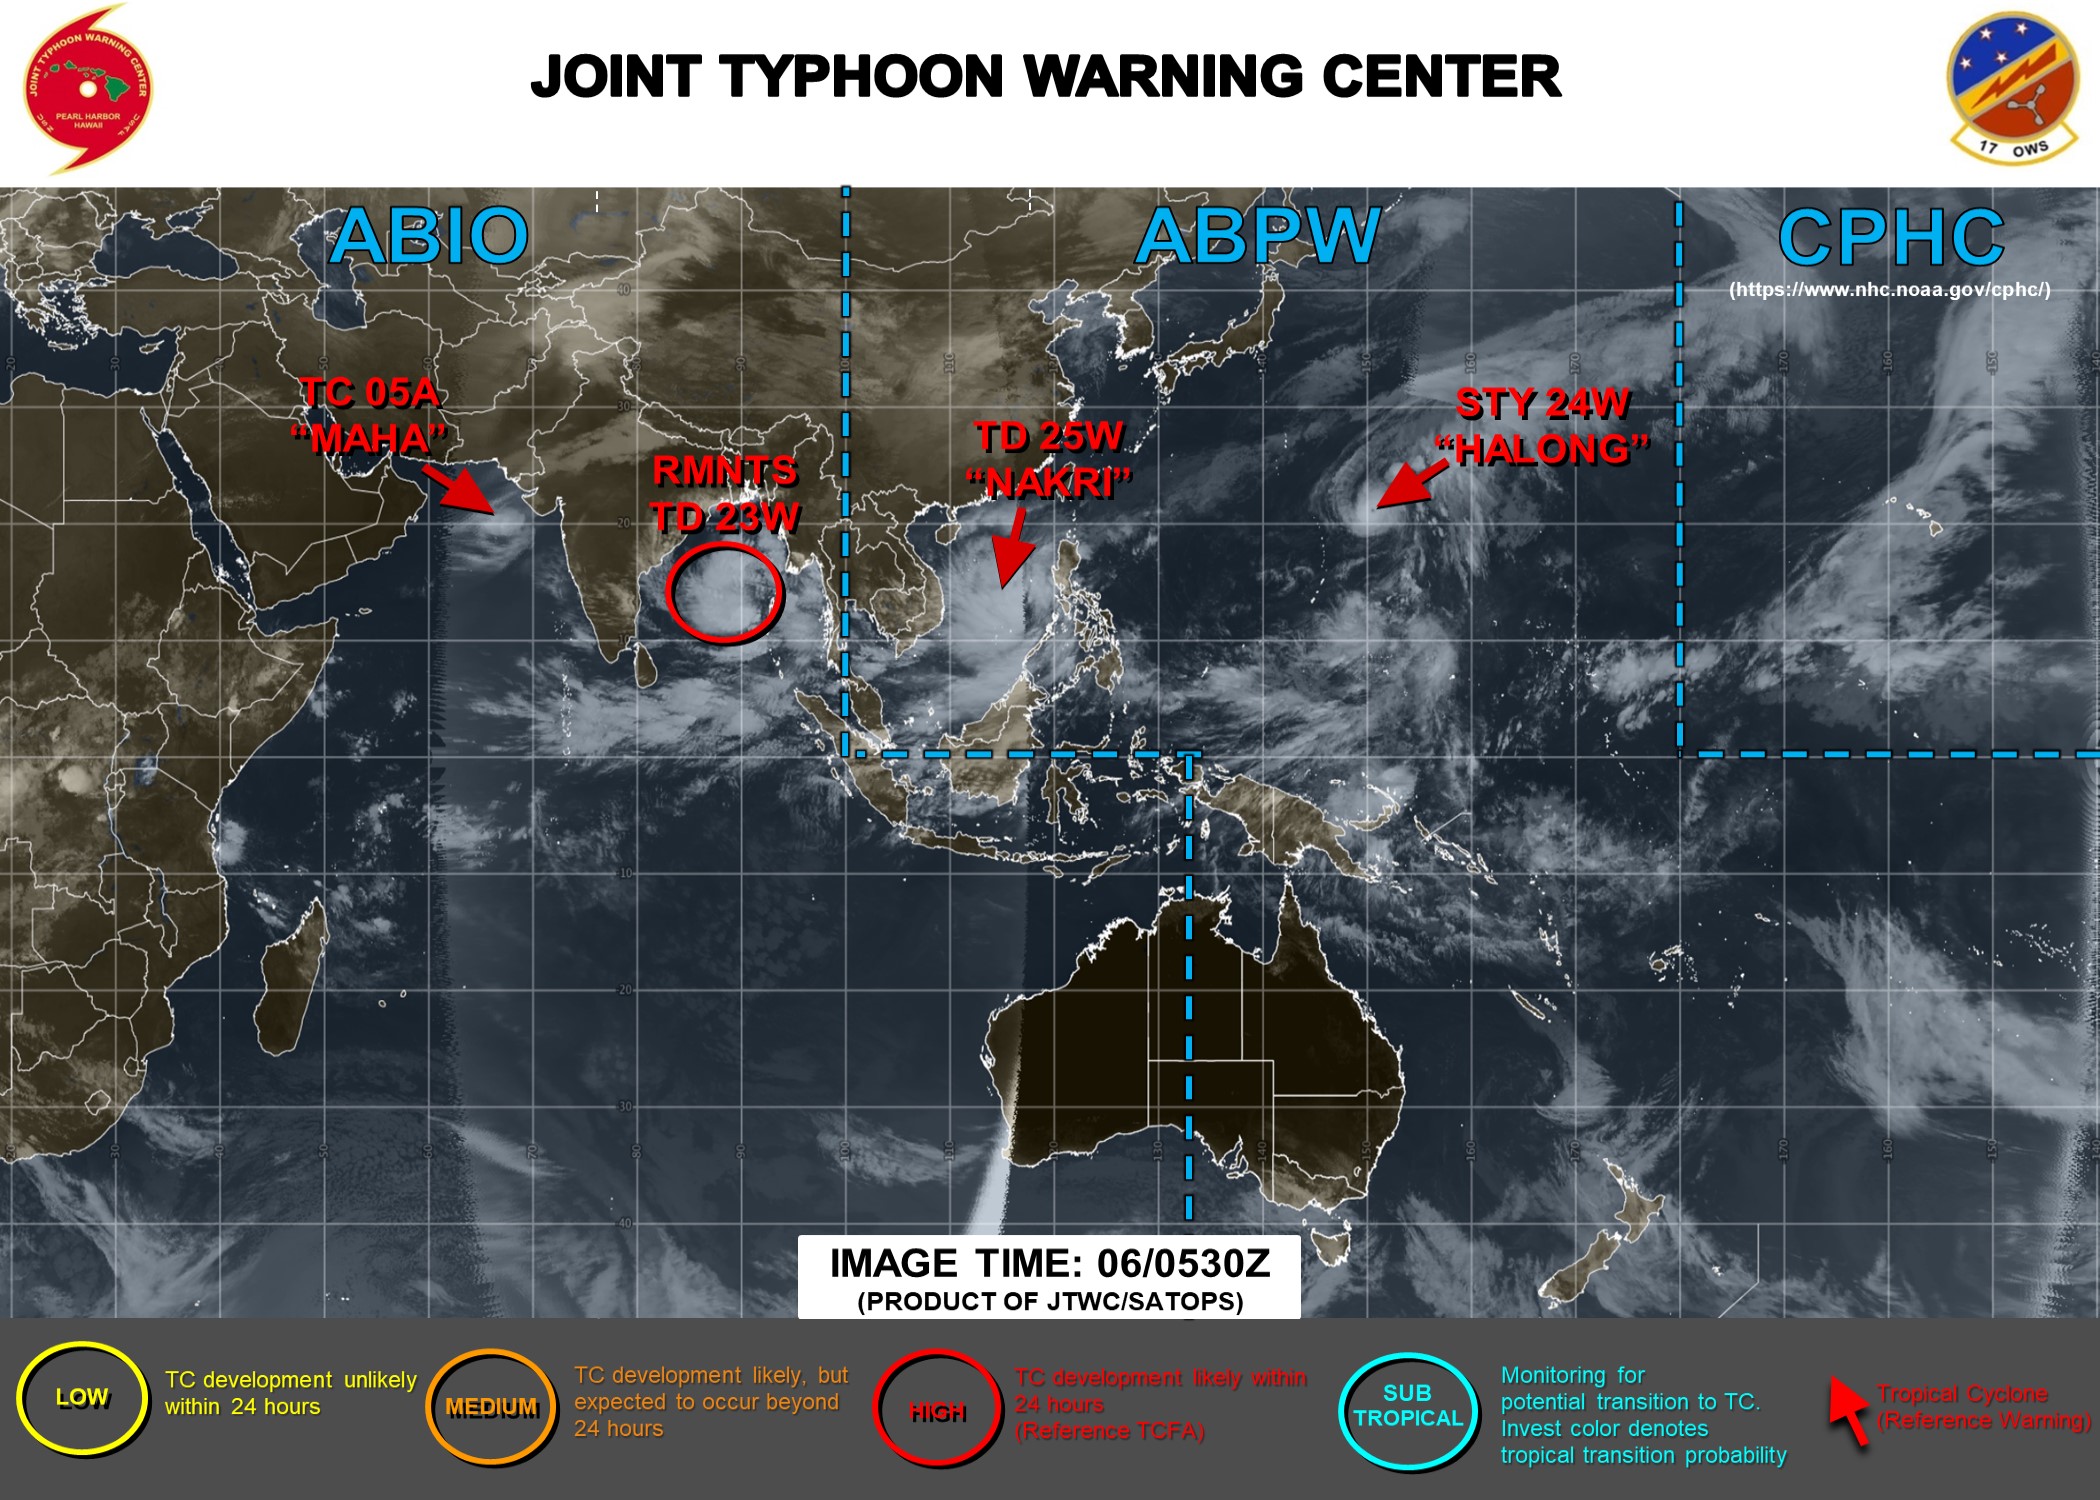 Busy: 4 systems being tracked. Halong(24W) still a Super Typhoon